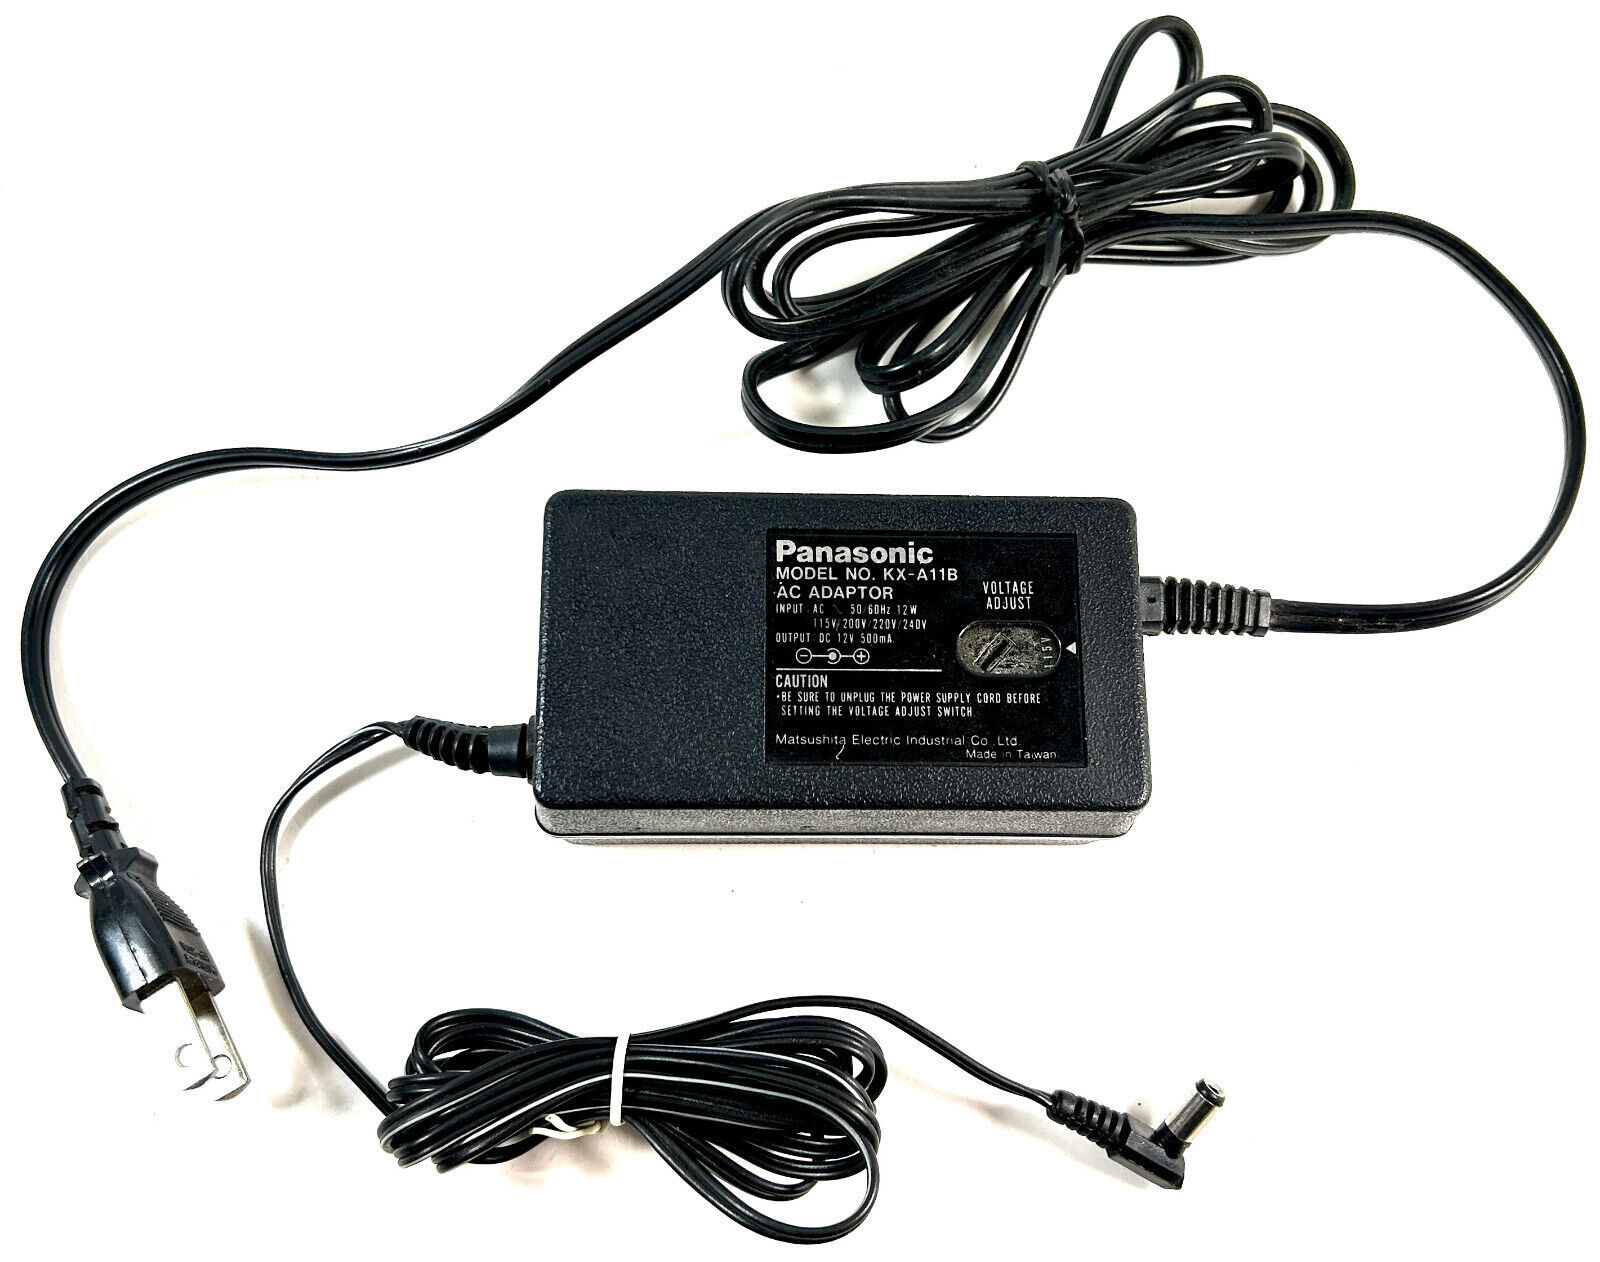 Panasonic KX-A11 AC/DC Power Supply Adapter Charger Output 12V 500mA - $21.73